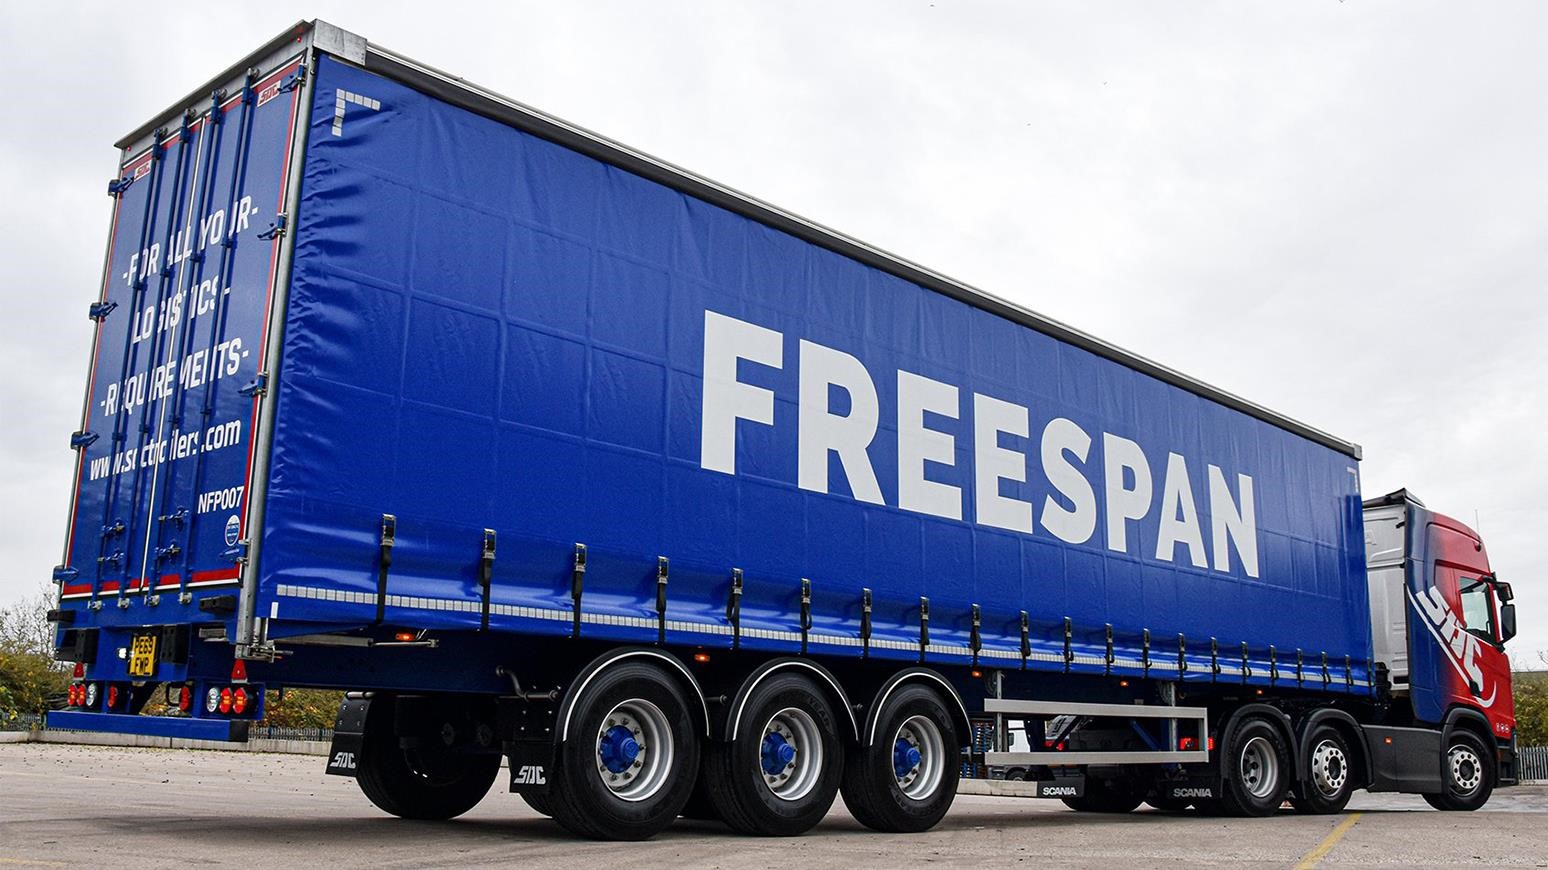 EN 12642 XL Certification Now Available As Standard For SDC Freespan & Insuliner Curtainsider Trailers